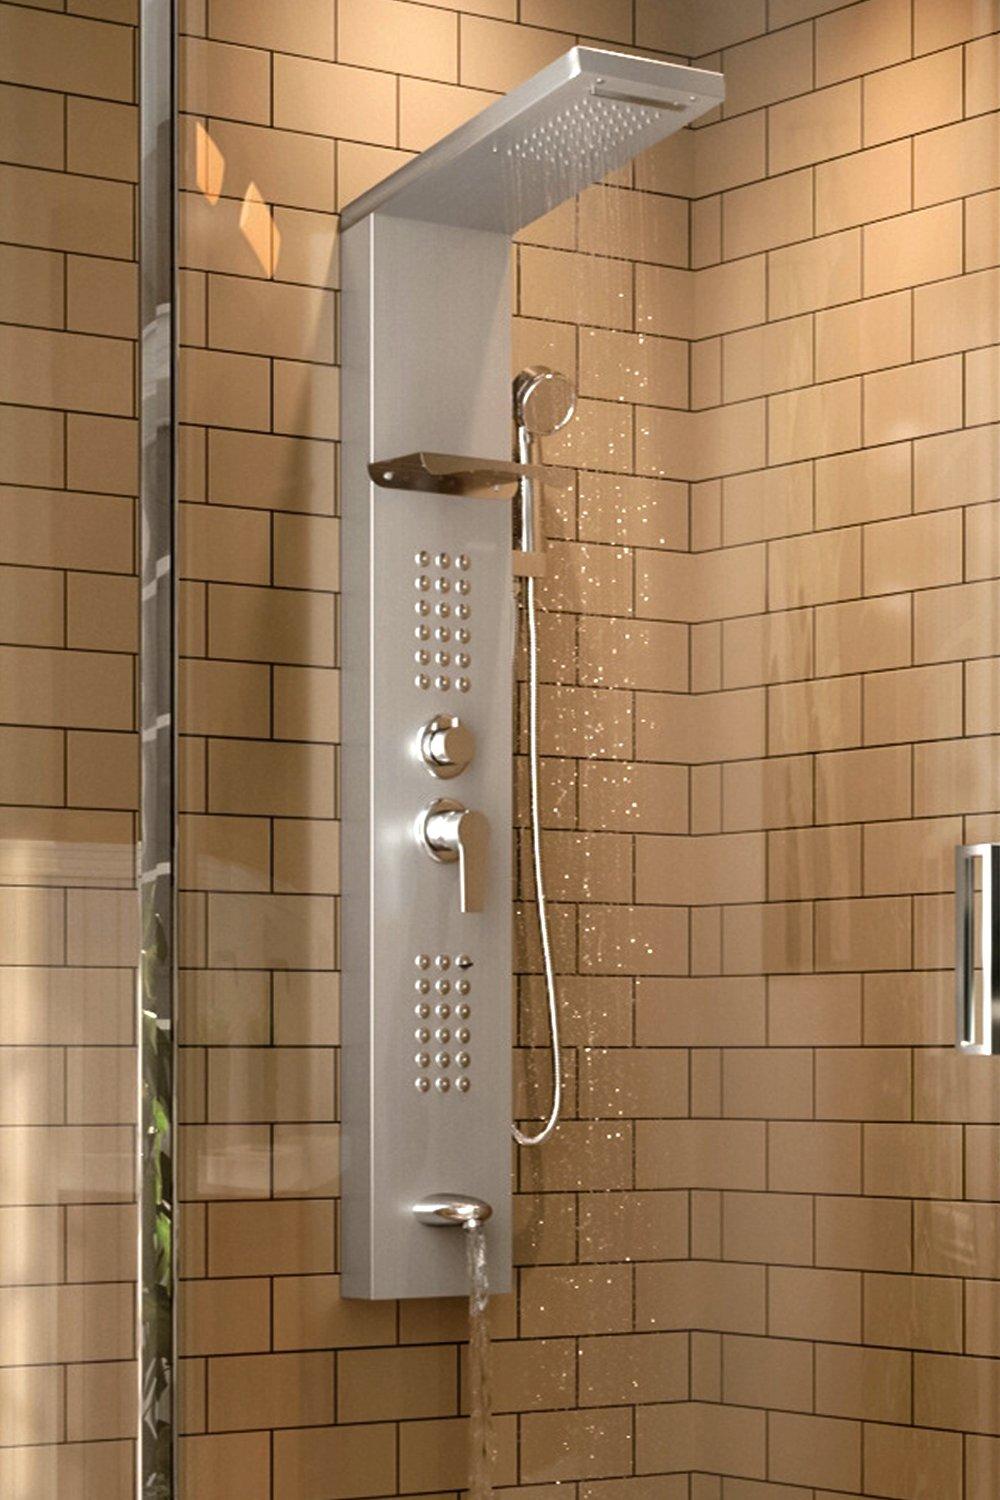 Wall Mount Stainless Steel Shower Panel Tower System Rain Shower Head Waterfall Large Area Jets with